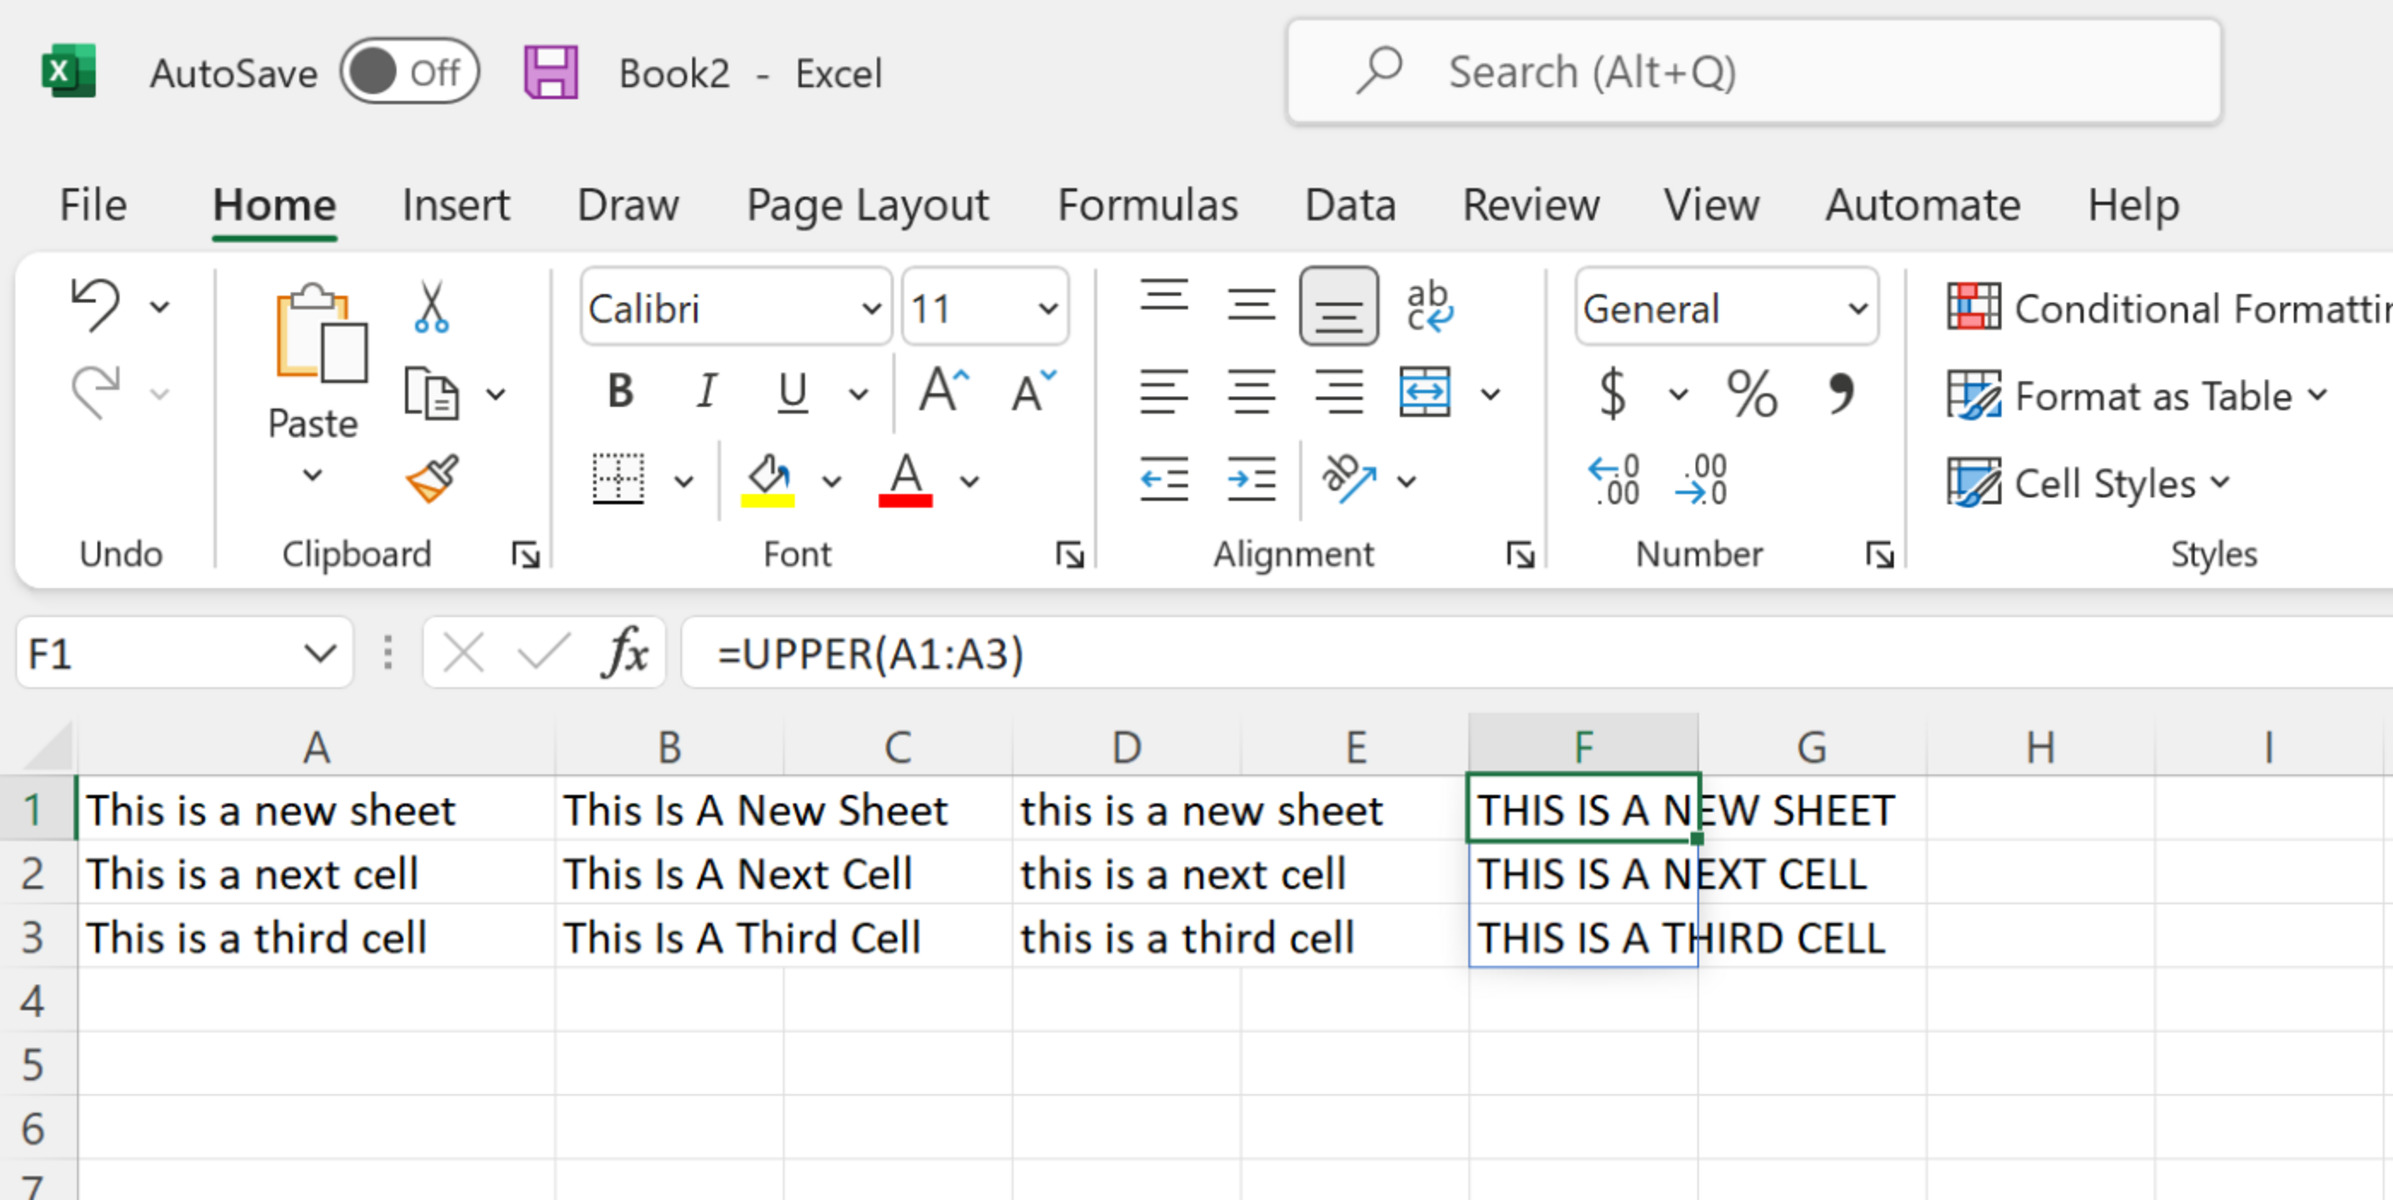 Convert Text To Upper, Lower, Or Proper Case In Excel